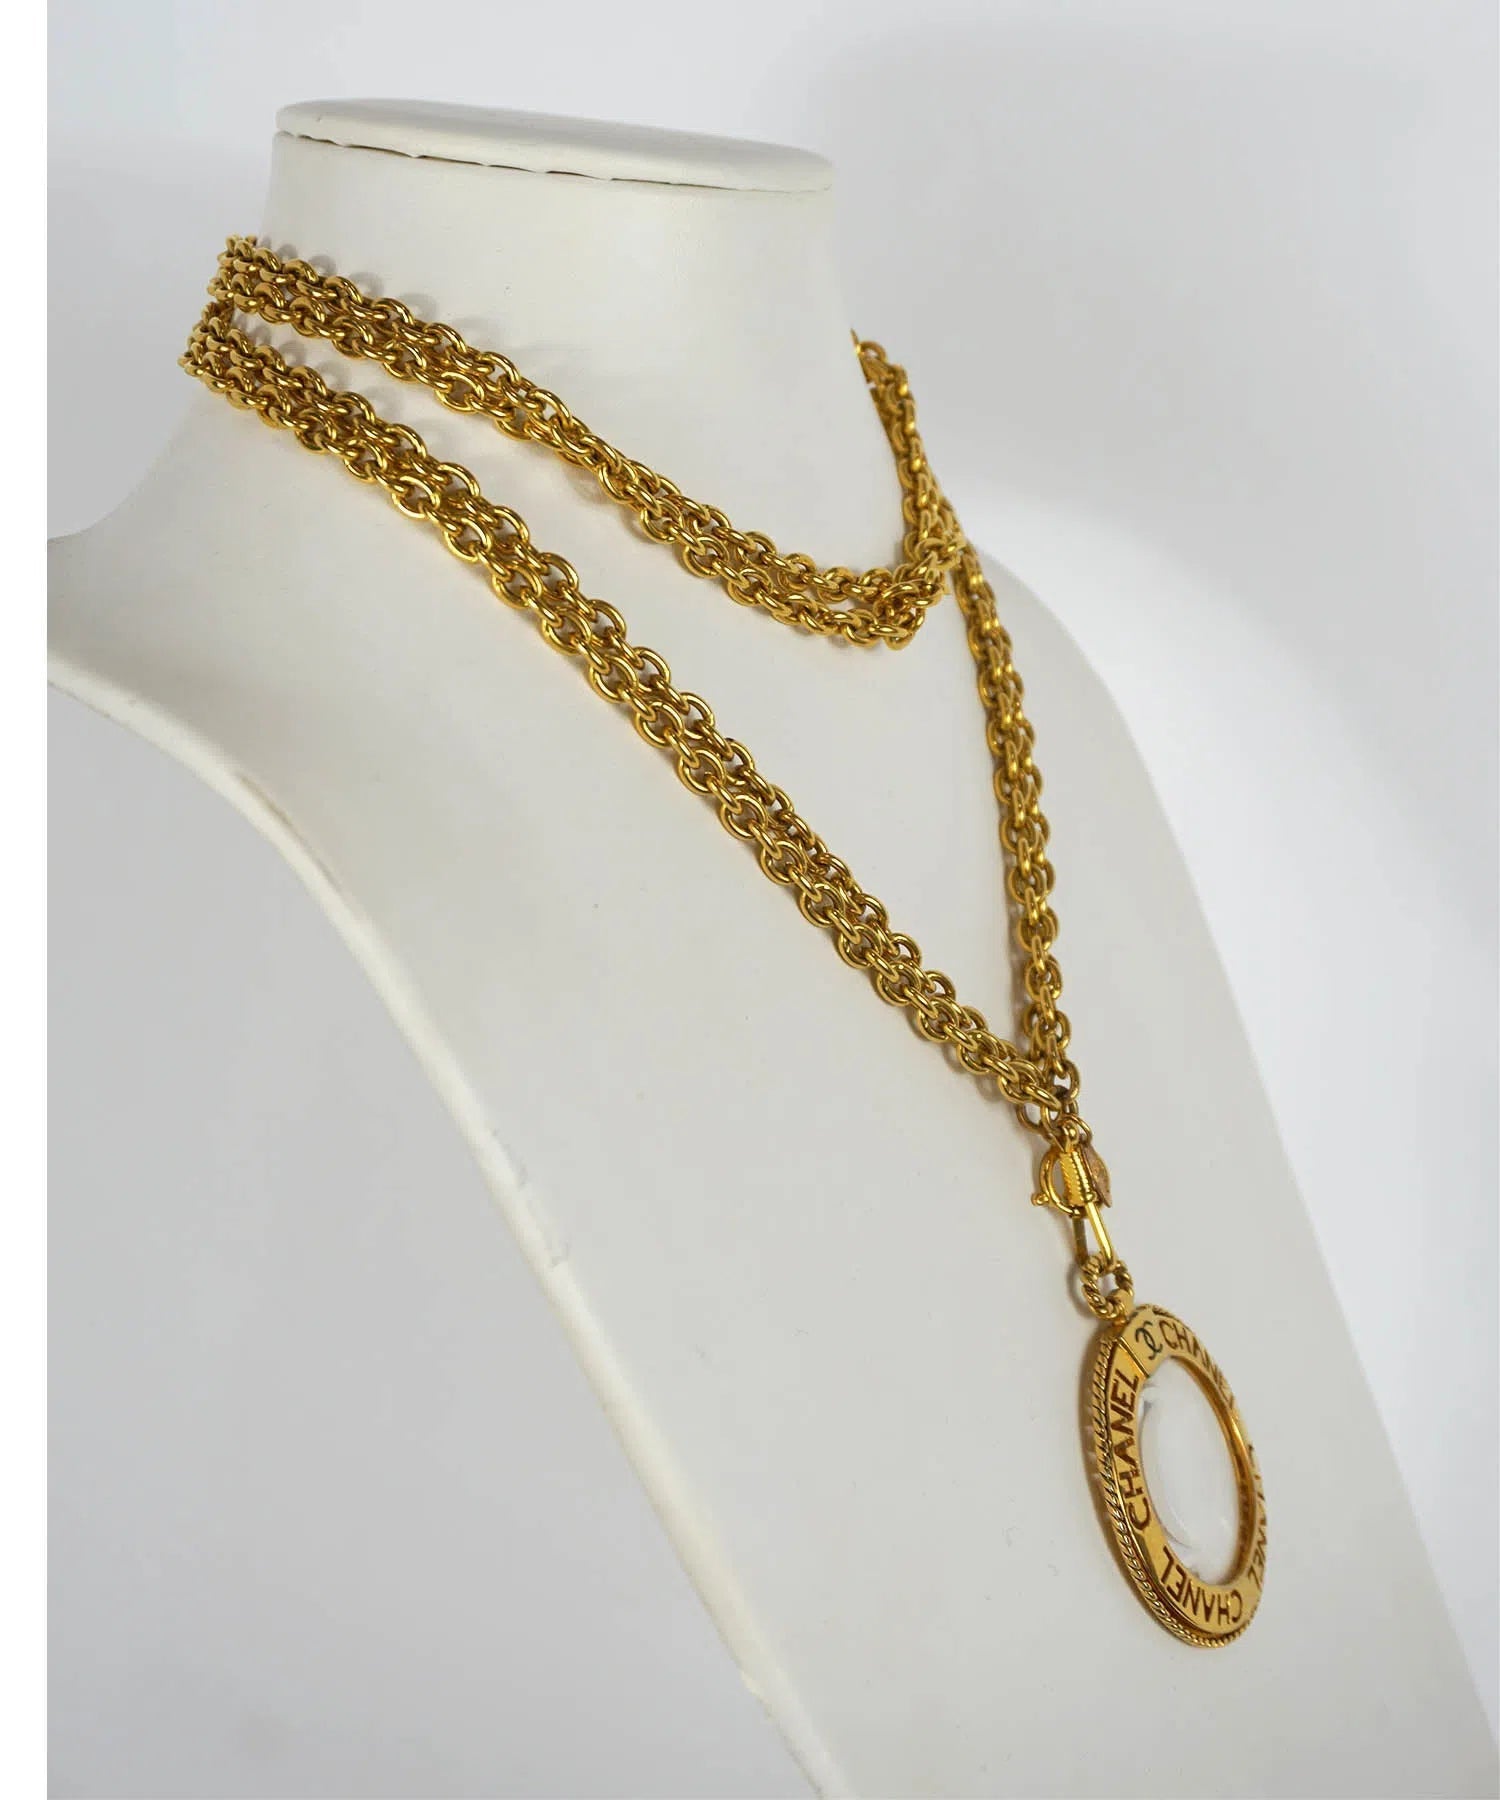 Chanel Vintage 1980's Magnifying Glass Necklace